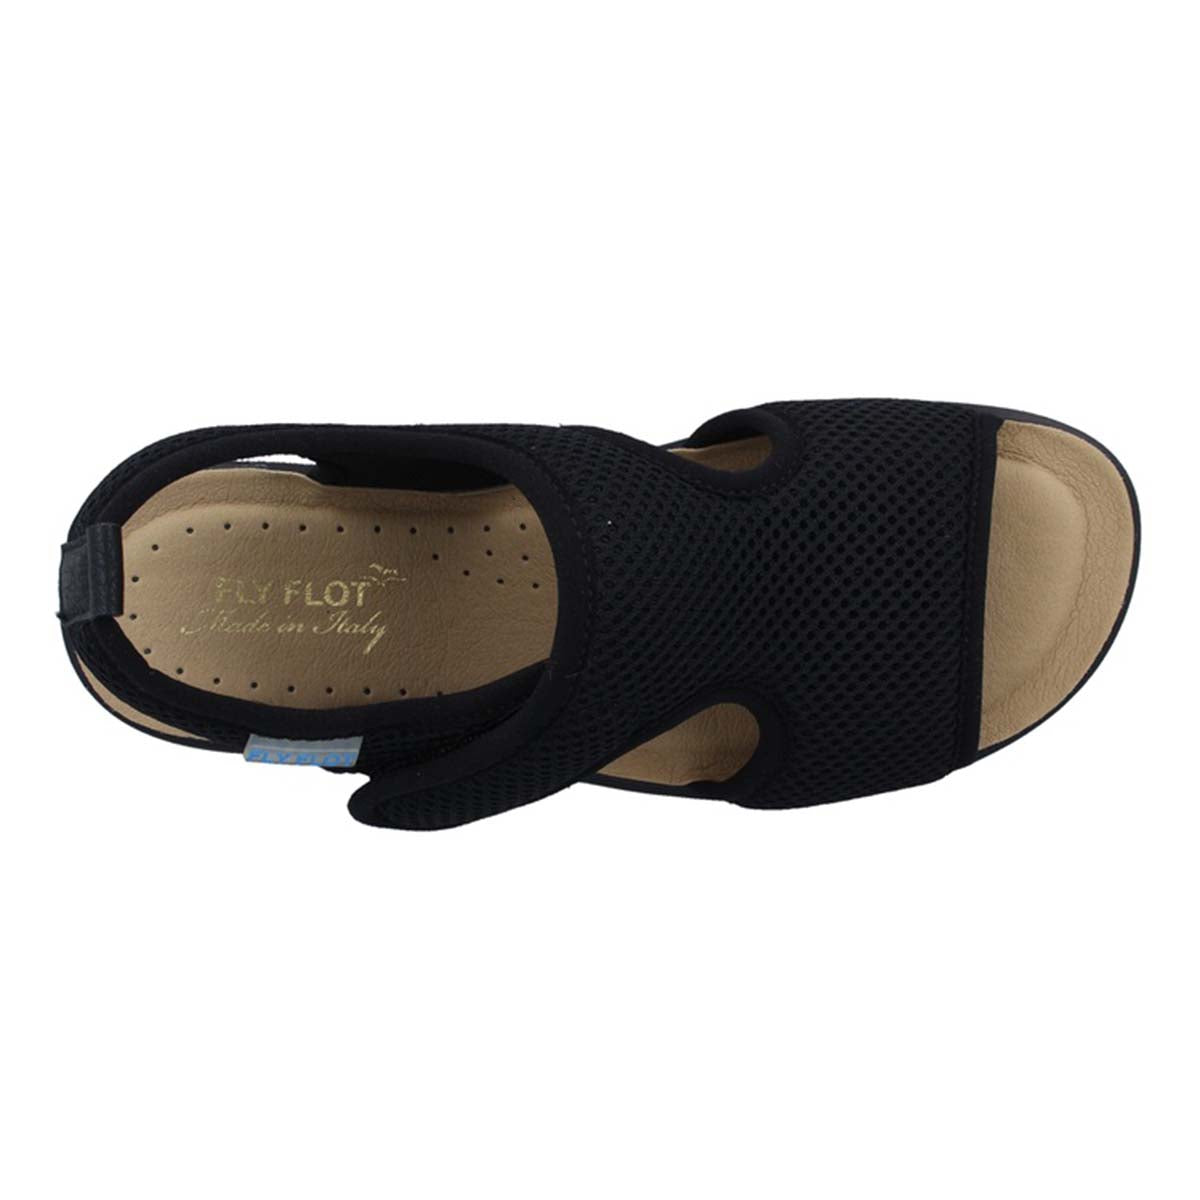 See the Velcro Back Strap Cloth Women Sandals With Anti-Shock Microfiber Insole in the colour BLACK, available in various sizes